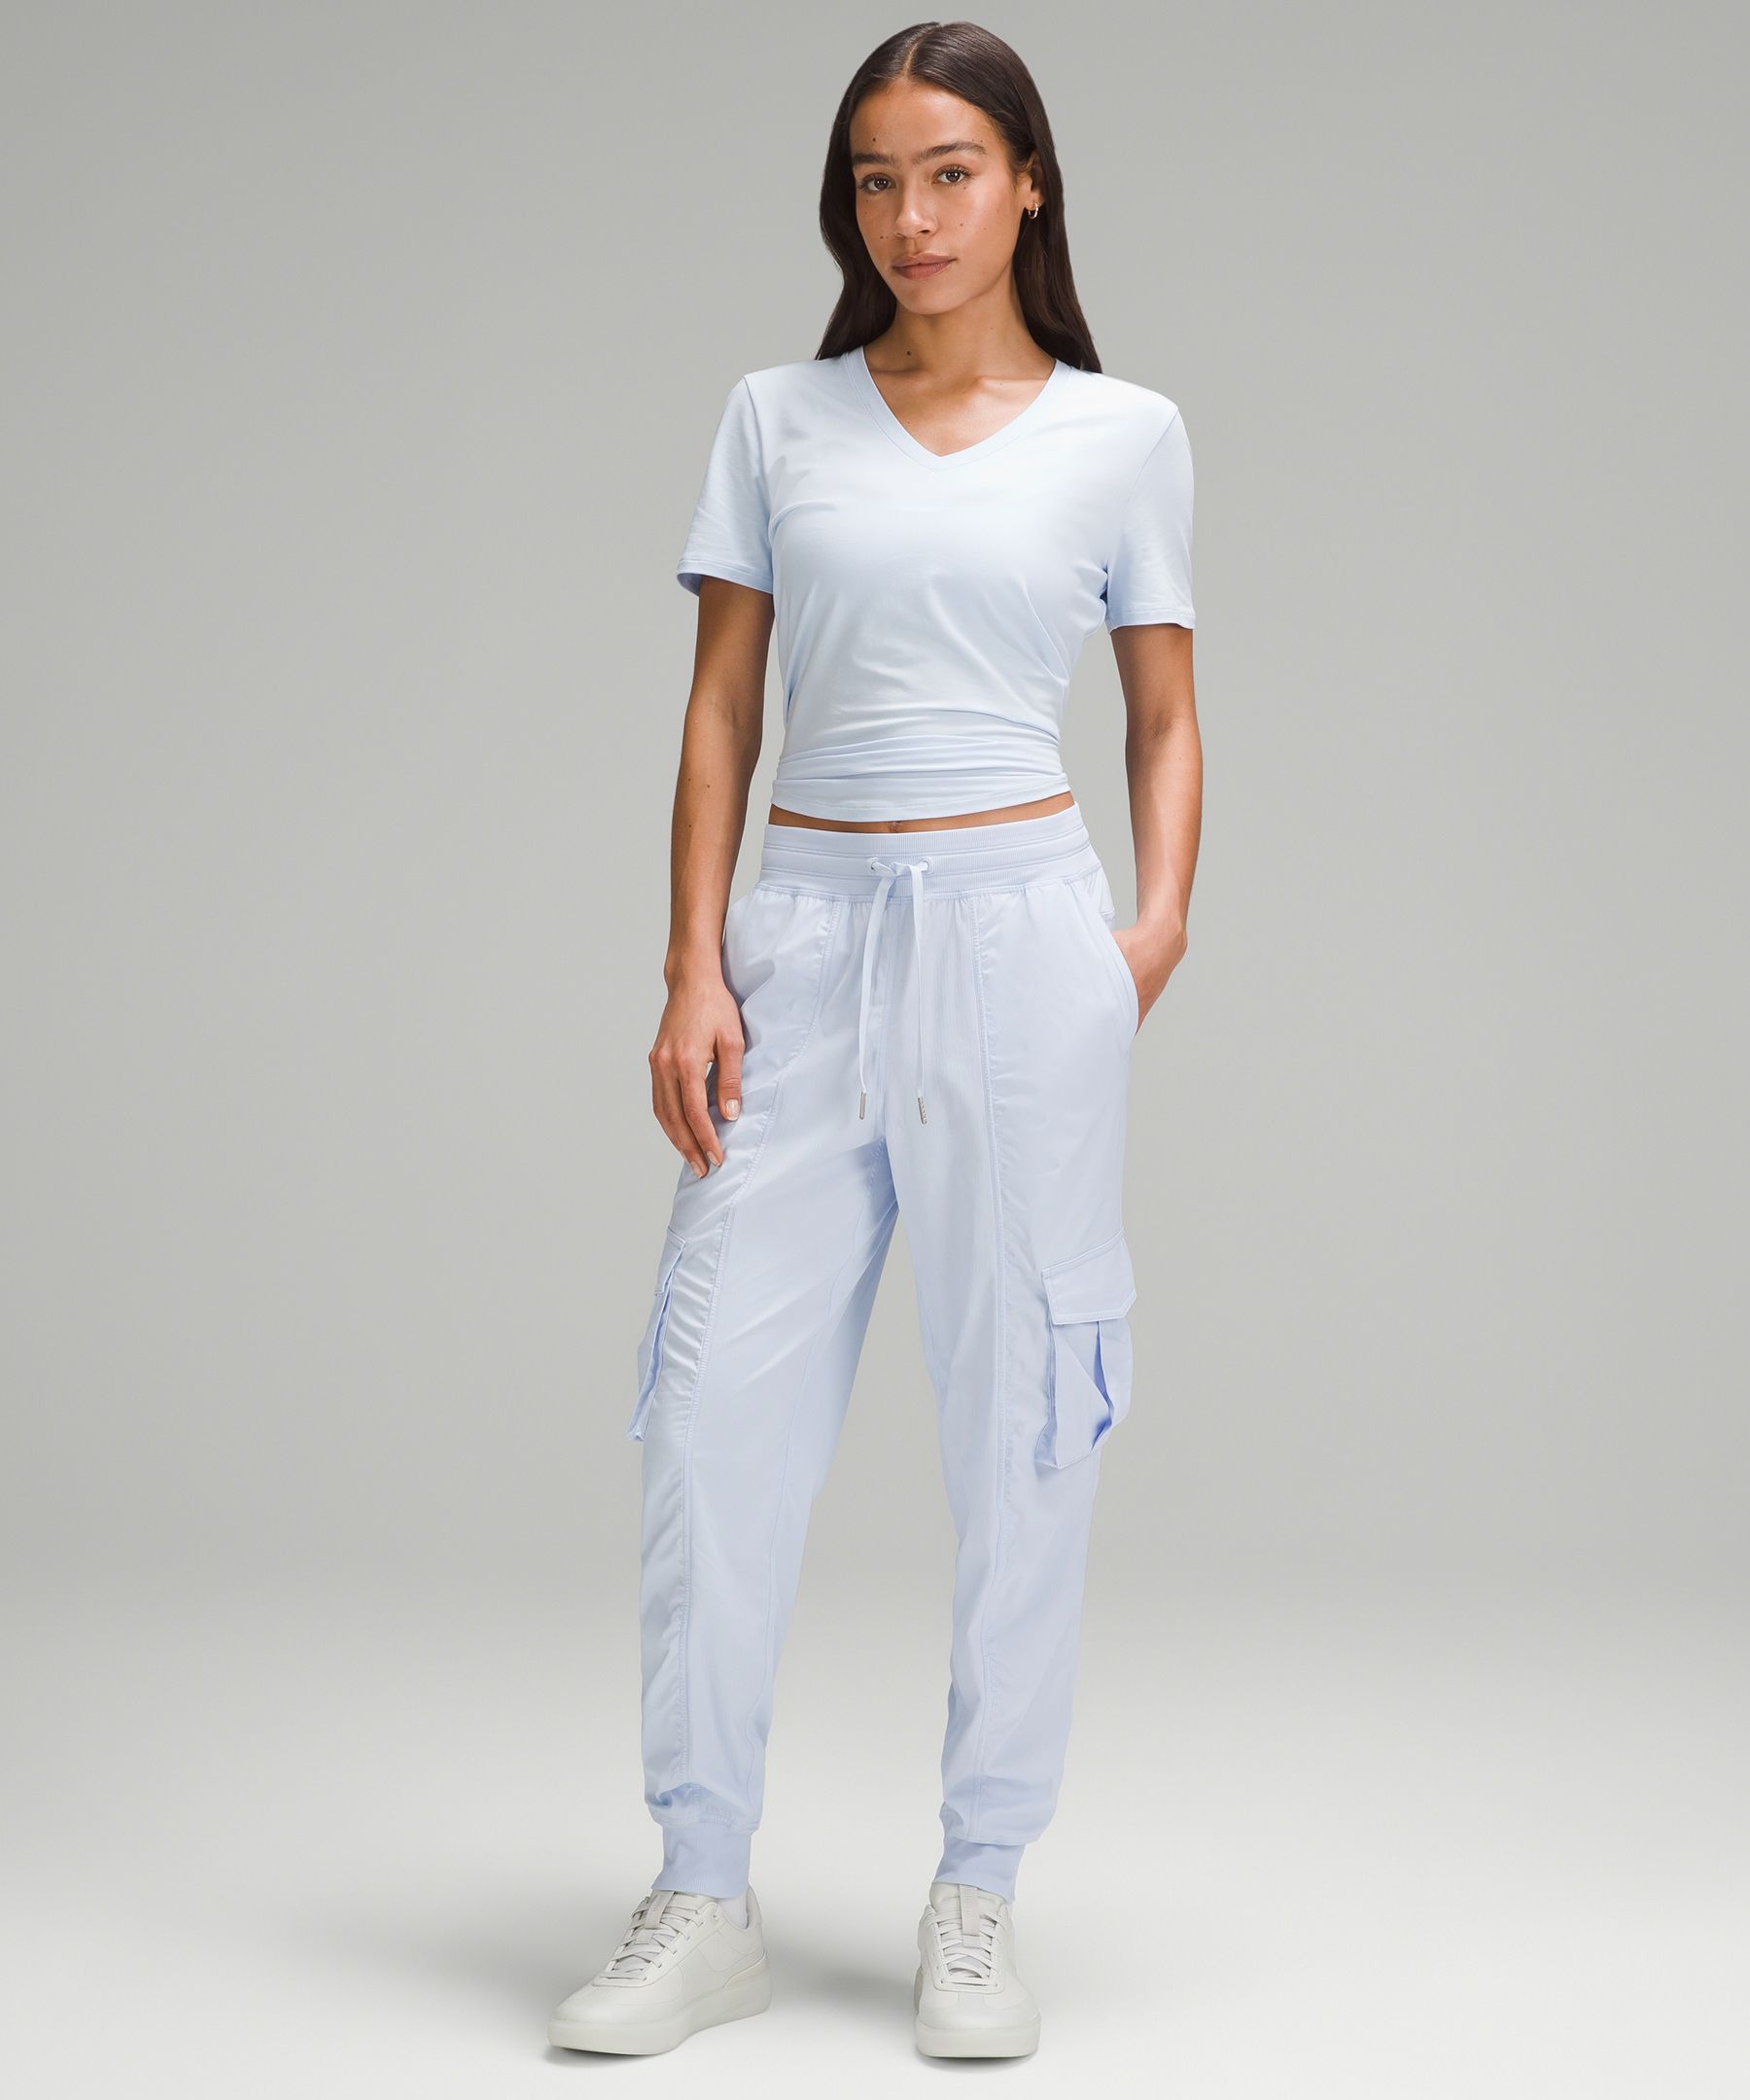 Shop Lululemon Dance Studio Relaxed-fit Mid-rise Cargo Joggers